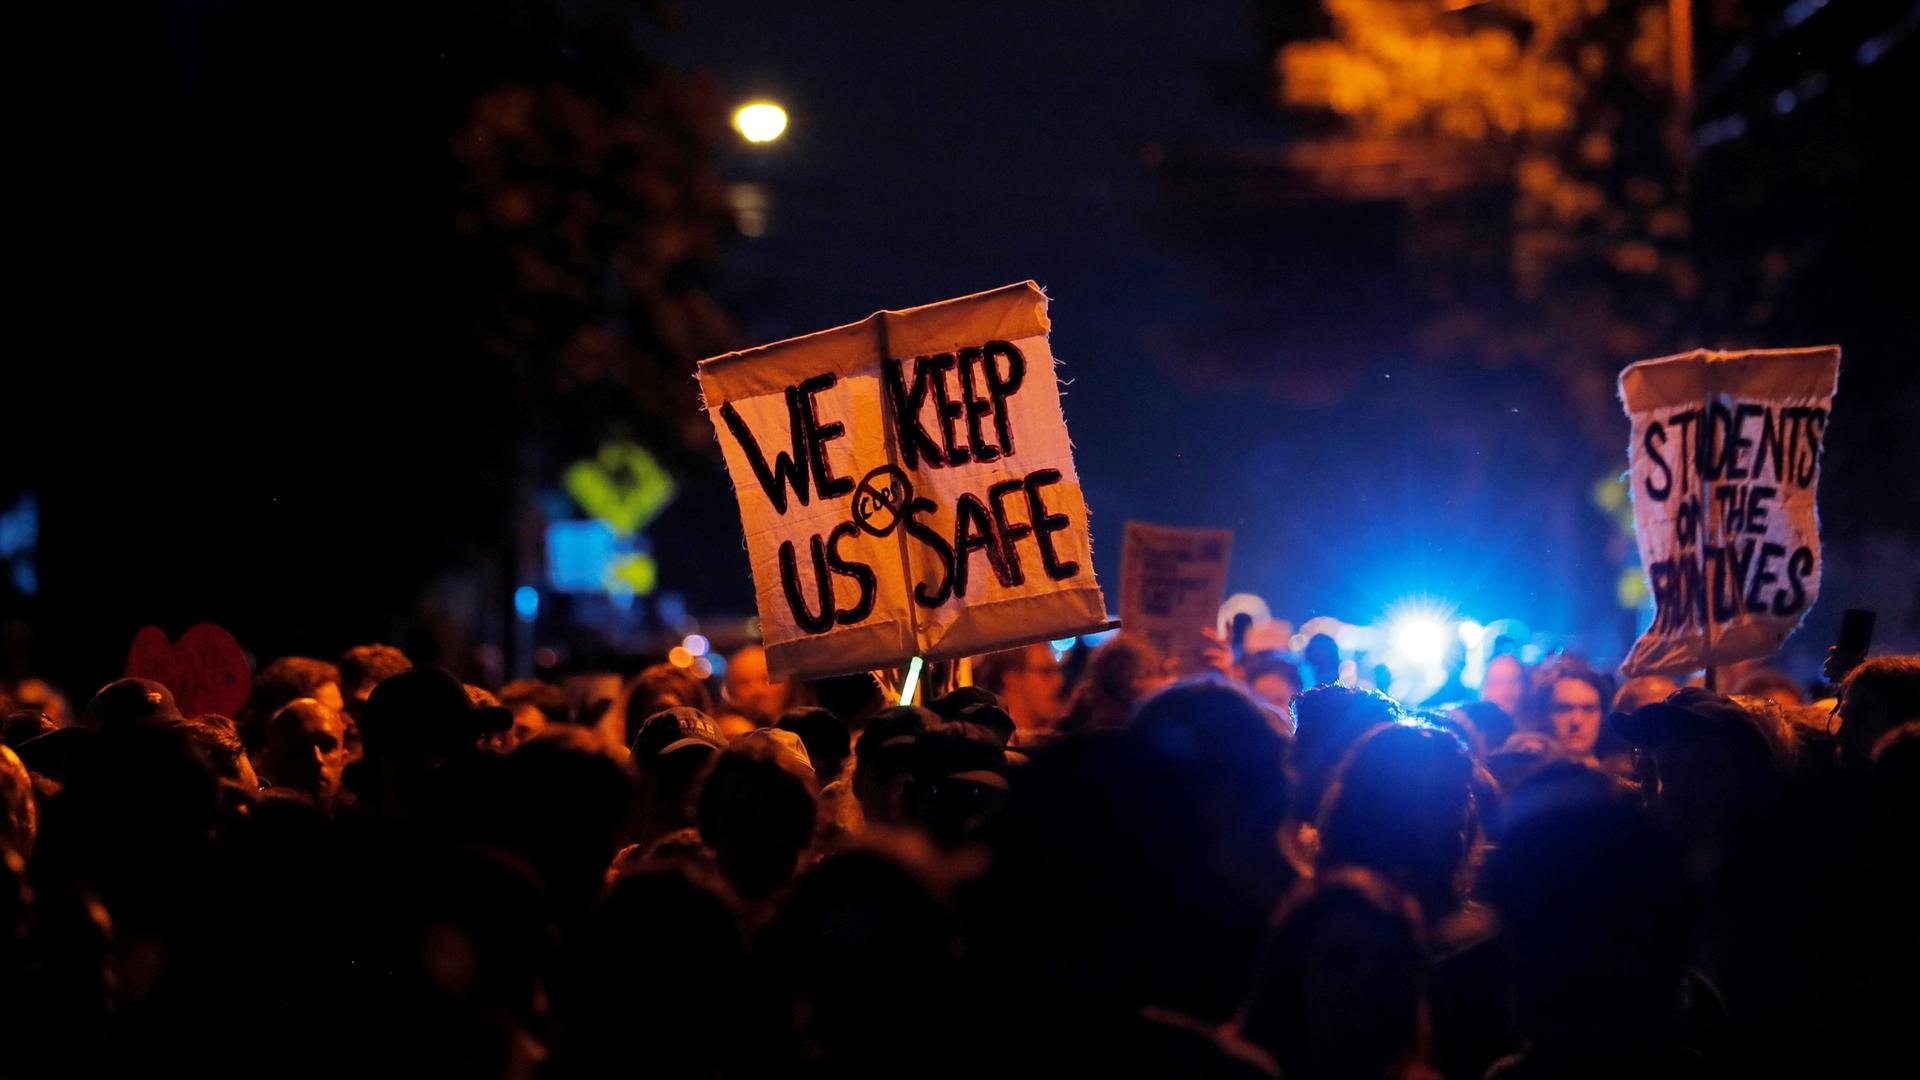 A crowd of people is illuminated by the blue of a police light and a sign says 